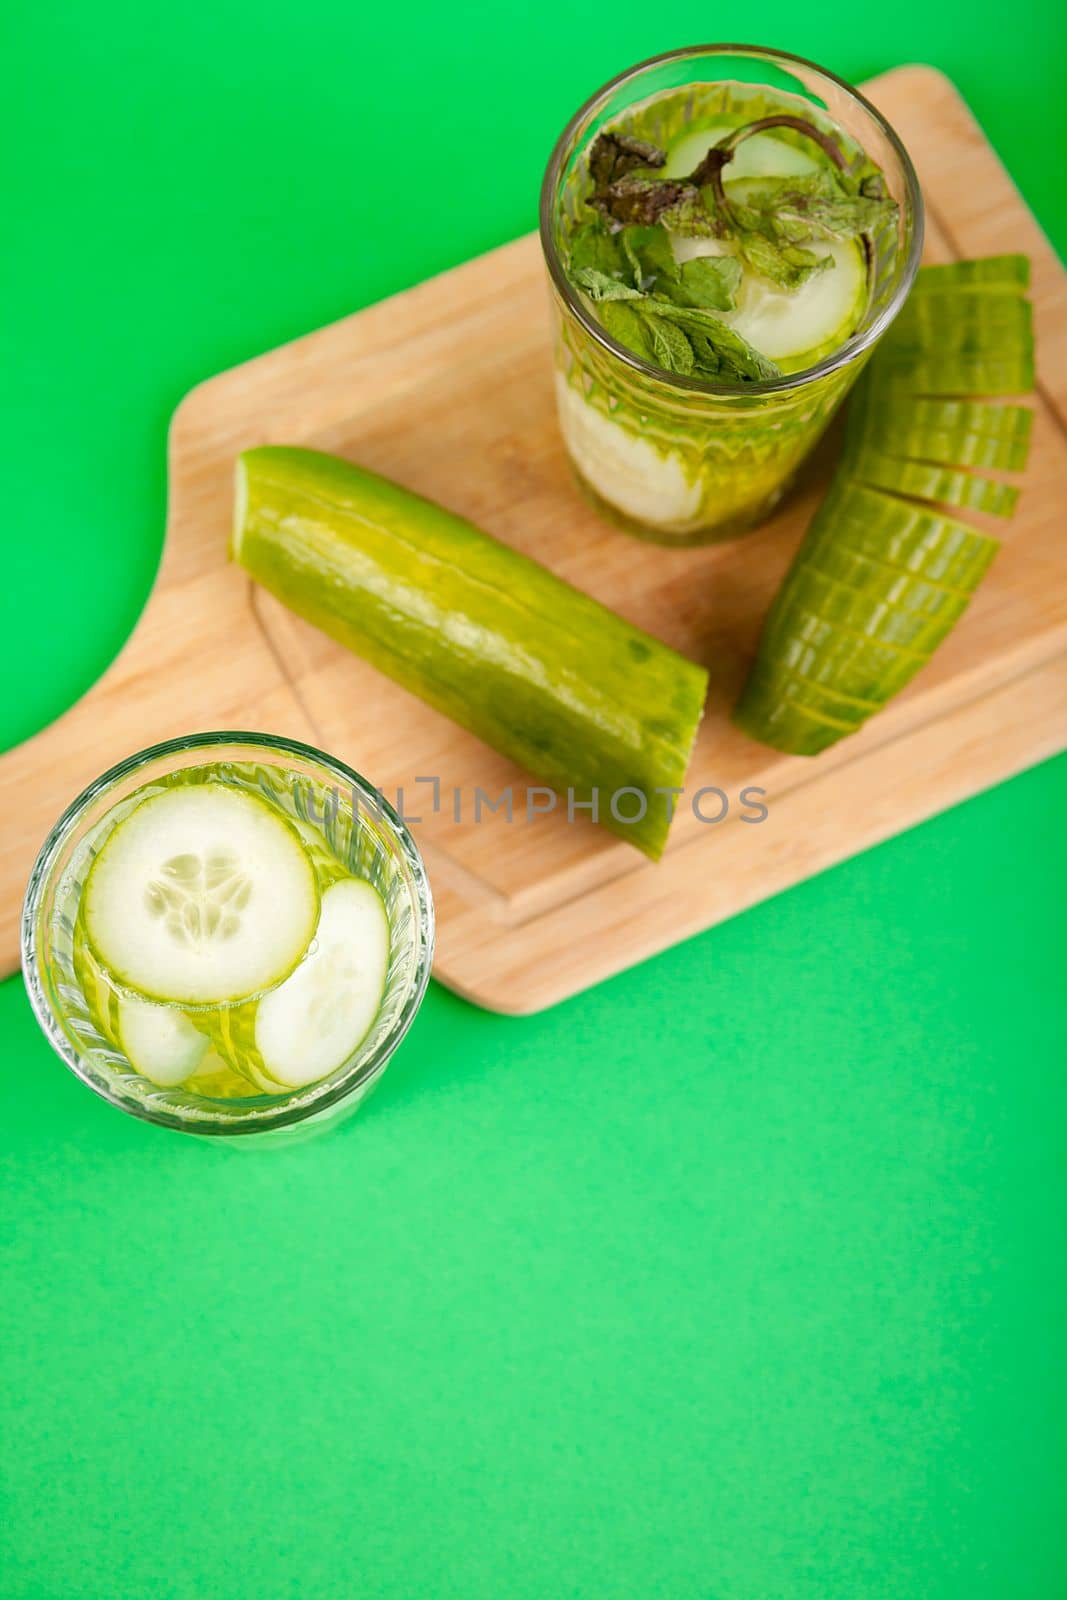 Homemade detox water from organic cucumbers by DCStudio